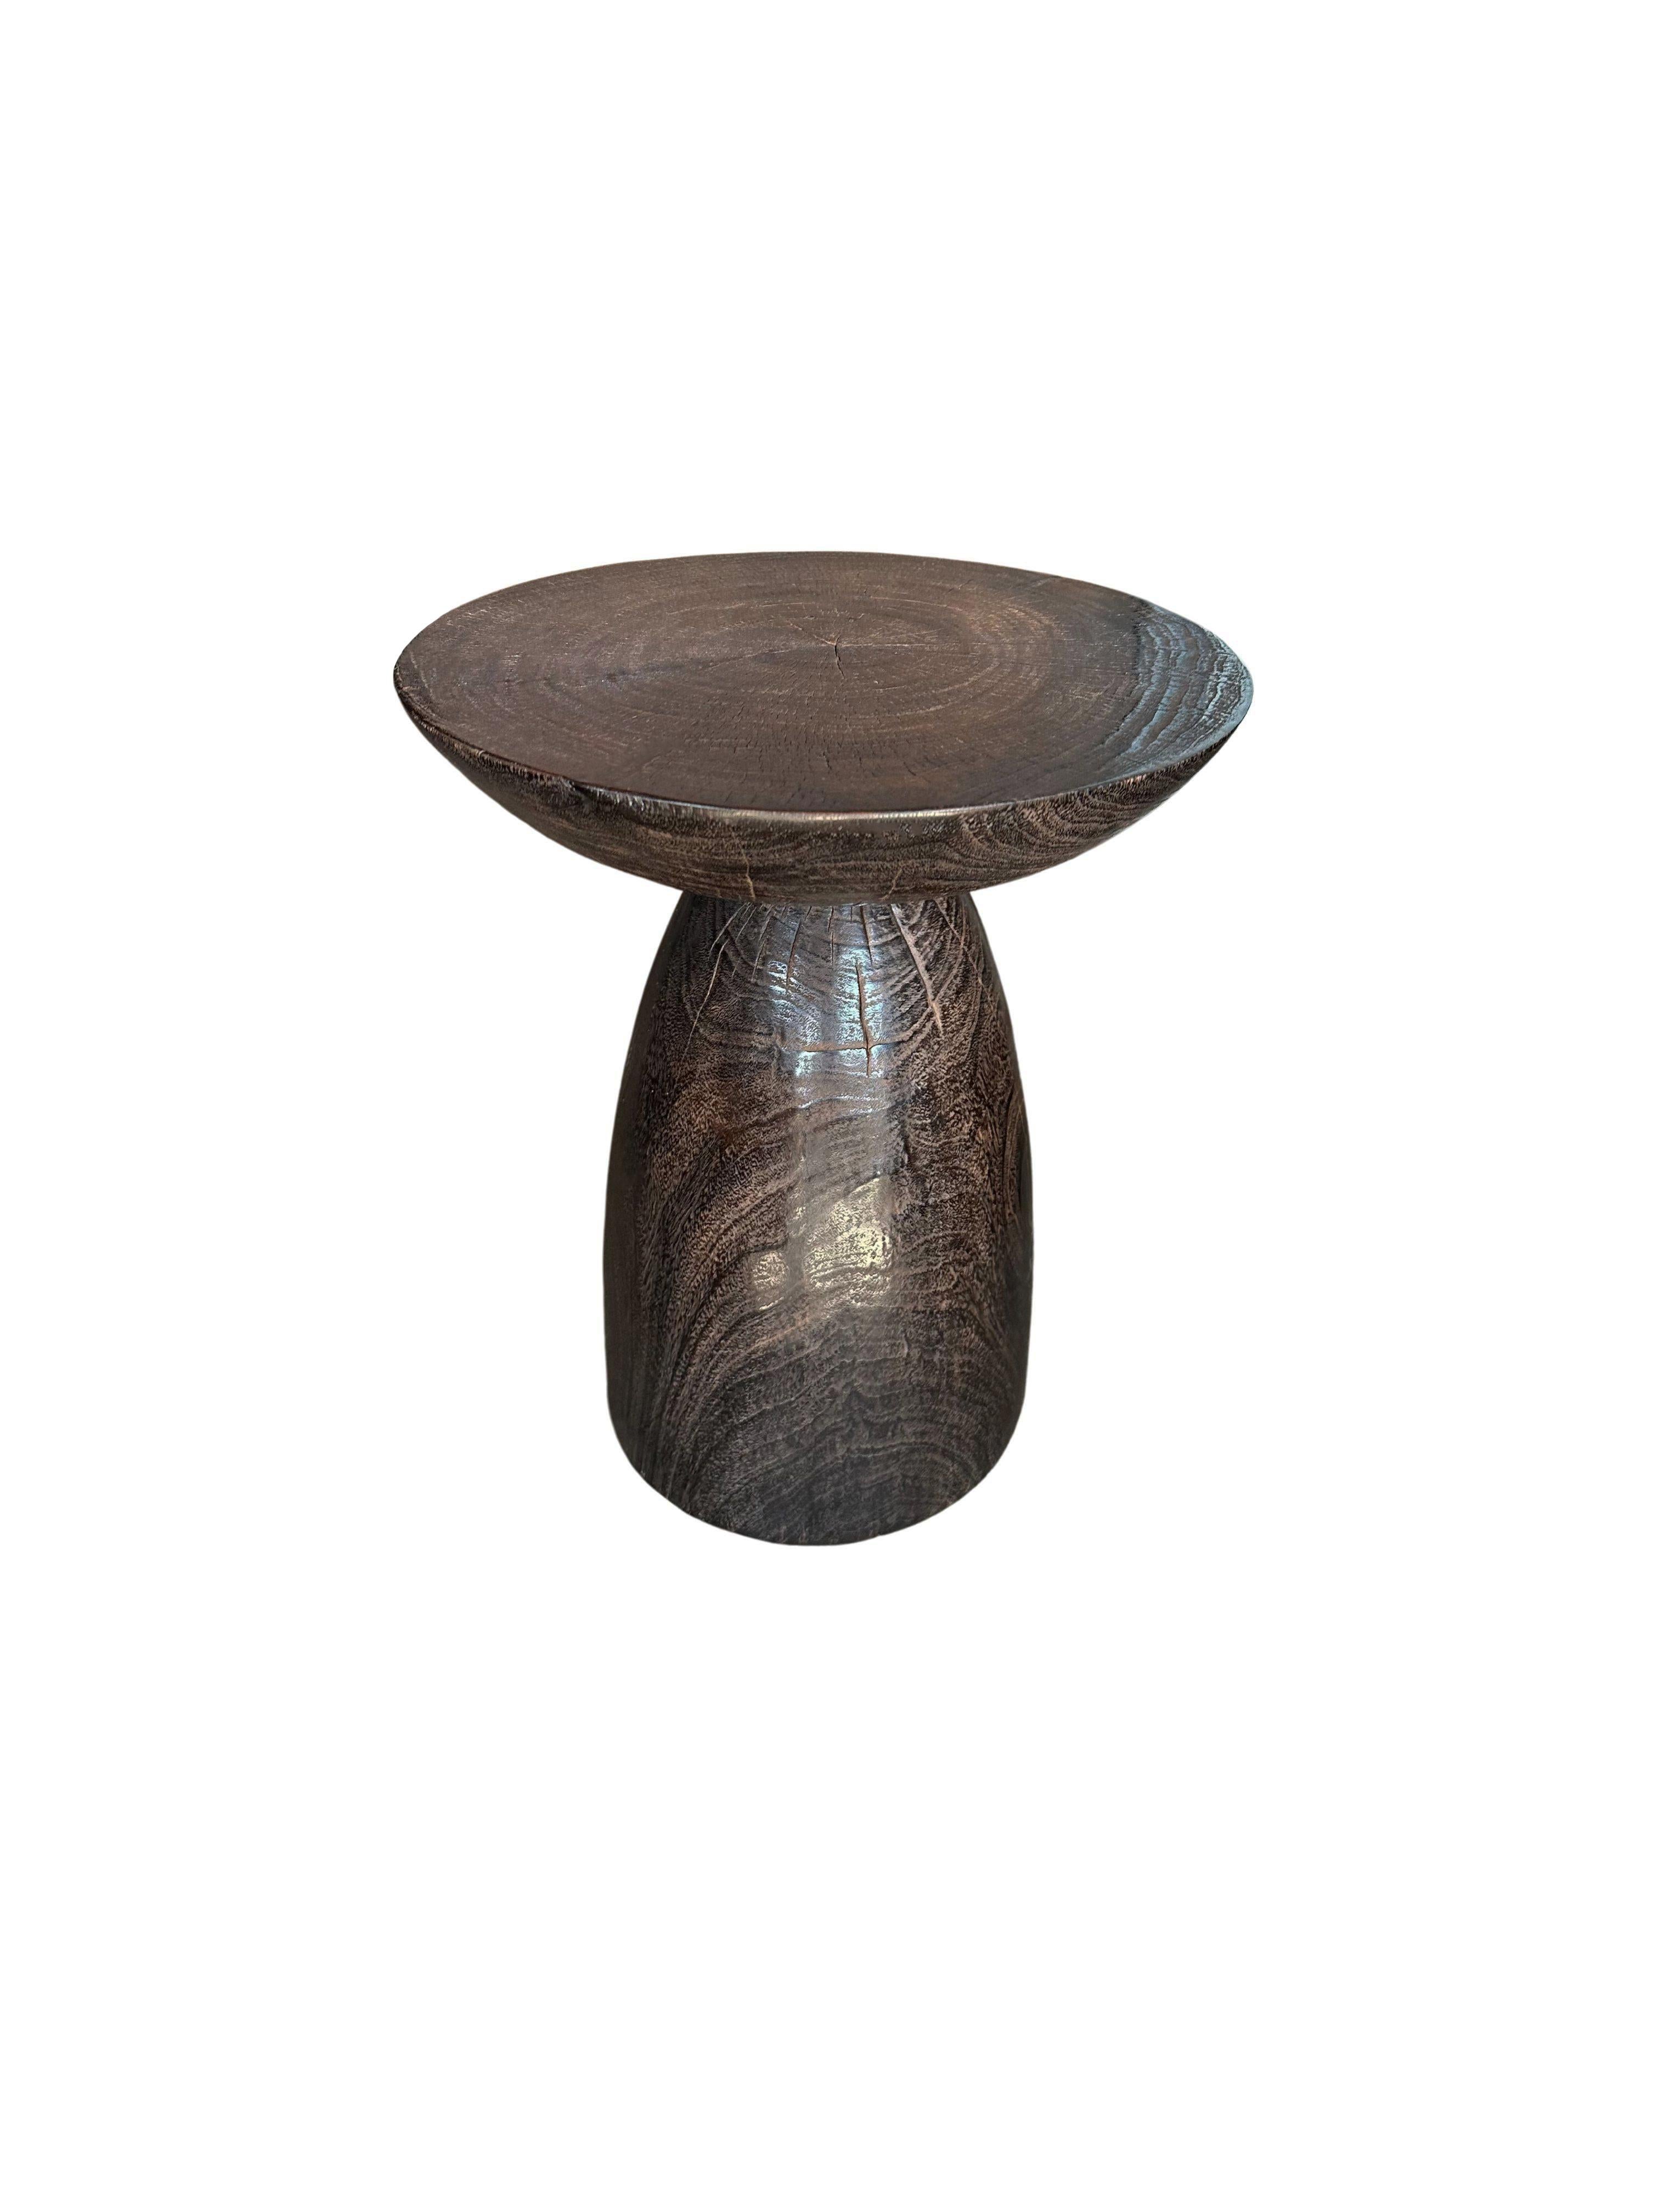 A wonderfully sculptural round side table, with an hourglass shape. Its neutral pigments make it perfect for any space. A uniquely sculptural and versatile piece certain to invoke conversation. It was crafted from a solid block of mango wood and has